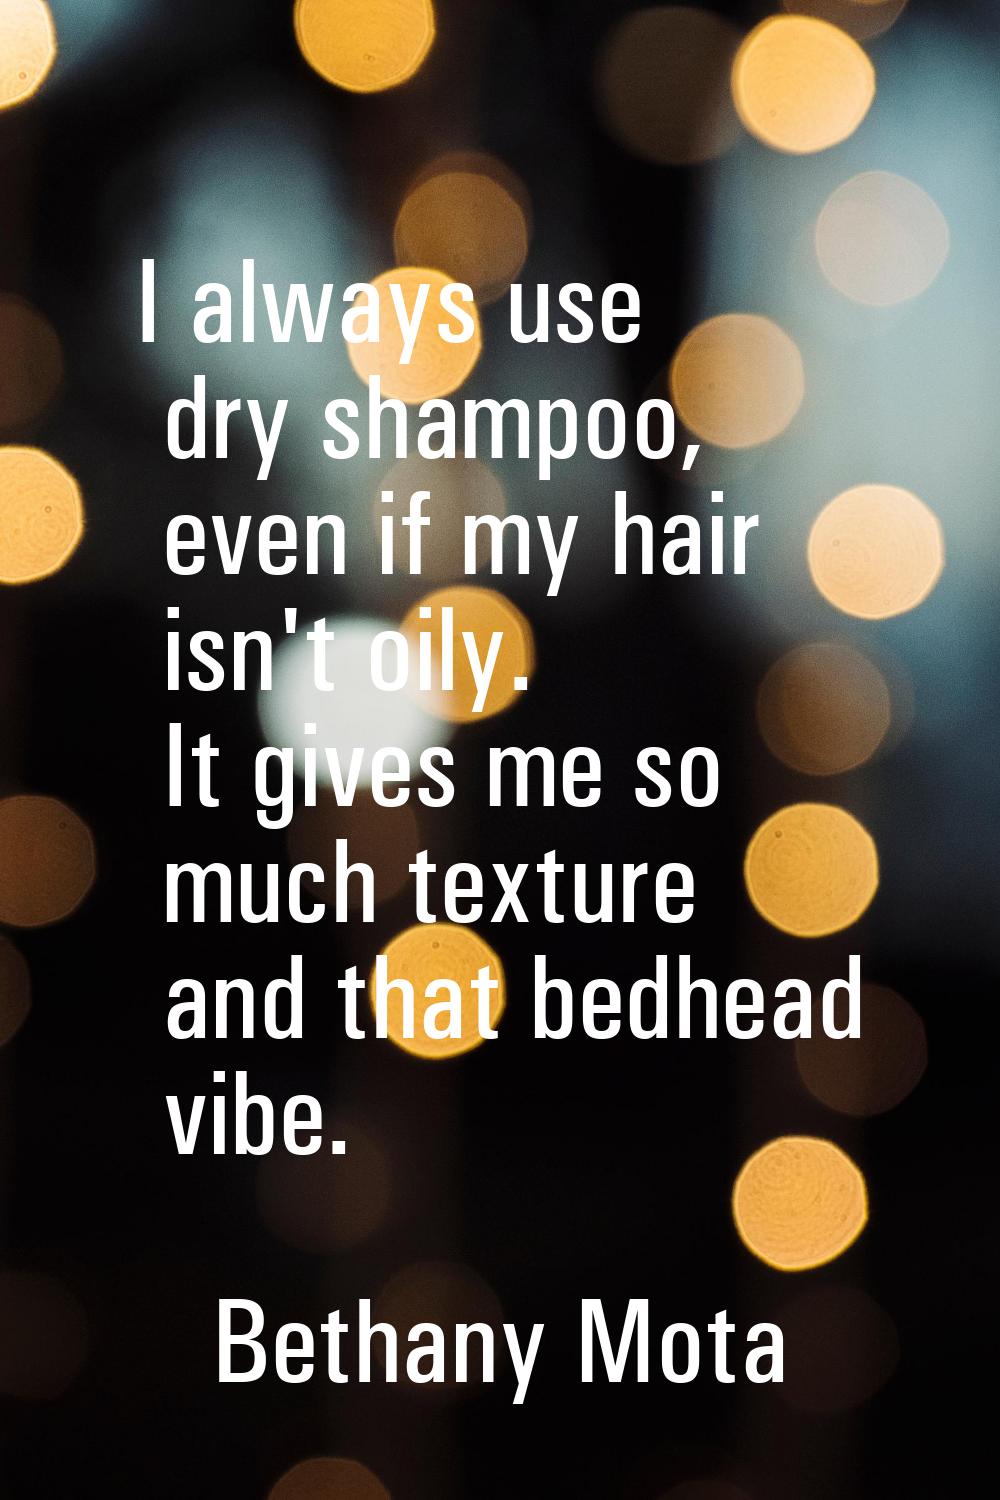 I always use dry shampoo, even if my hair isn't oily. It gives me so much texture and that bedhead 